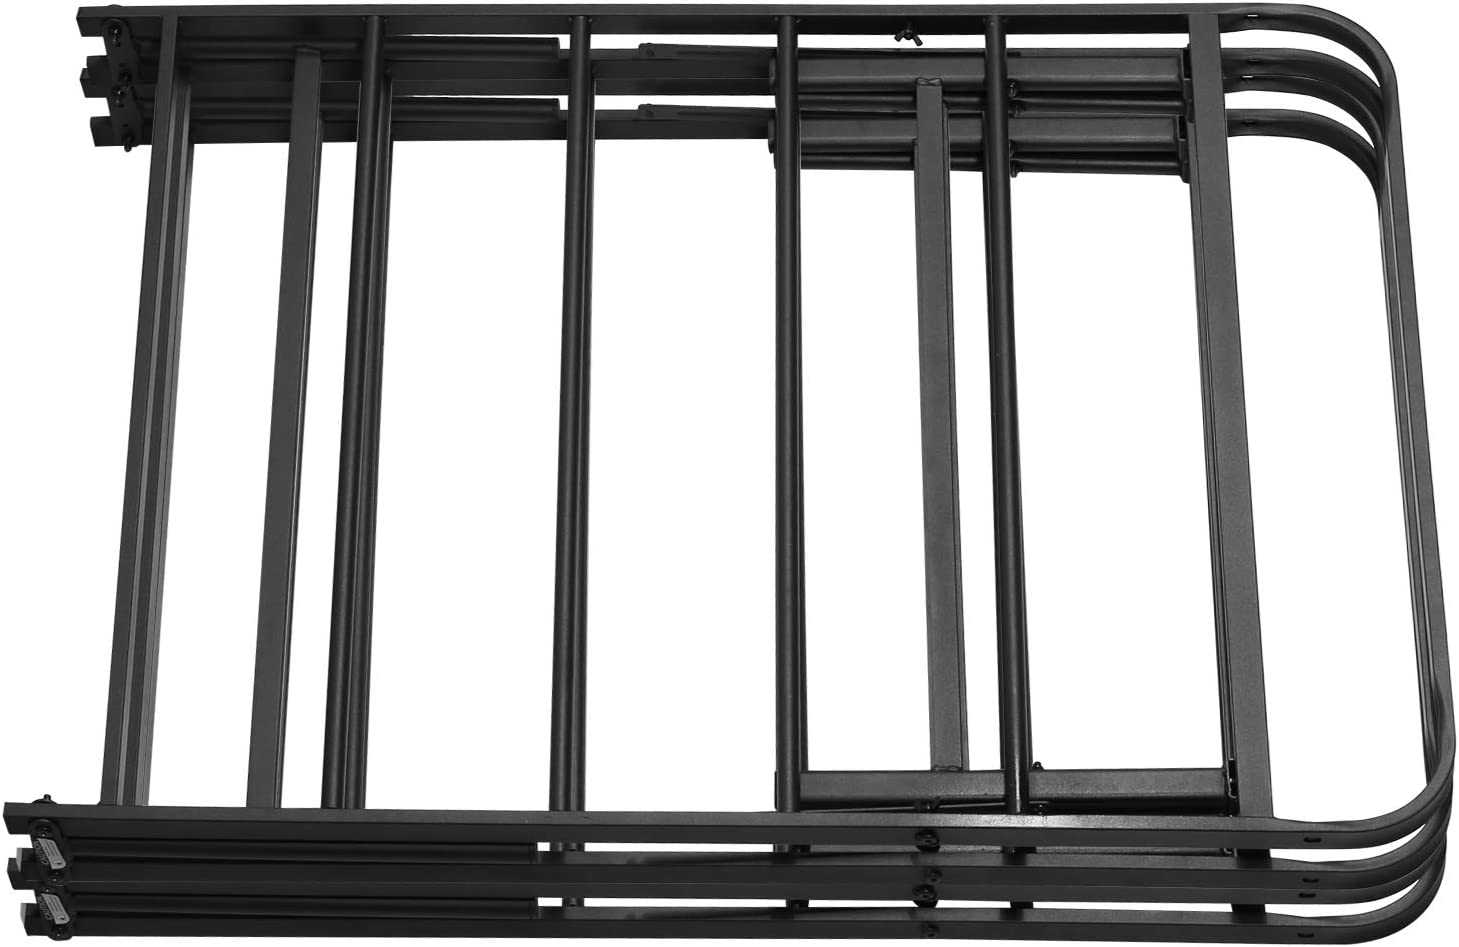 VECELO 14 Inch Foldable Metal Bed Frame Tool Assembly/Quiet Noise Free Black, Full/Queen/King